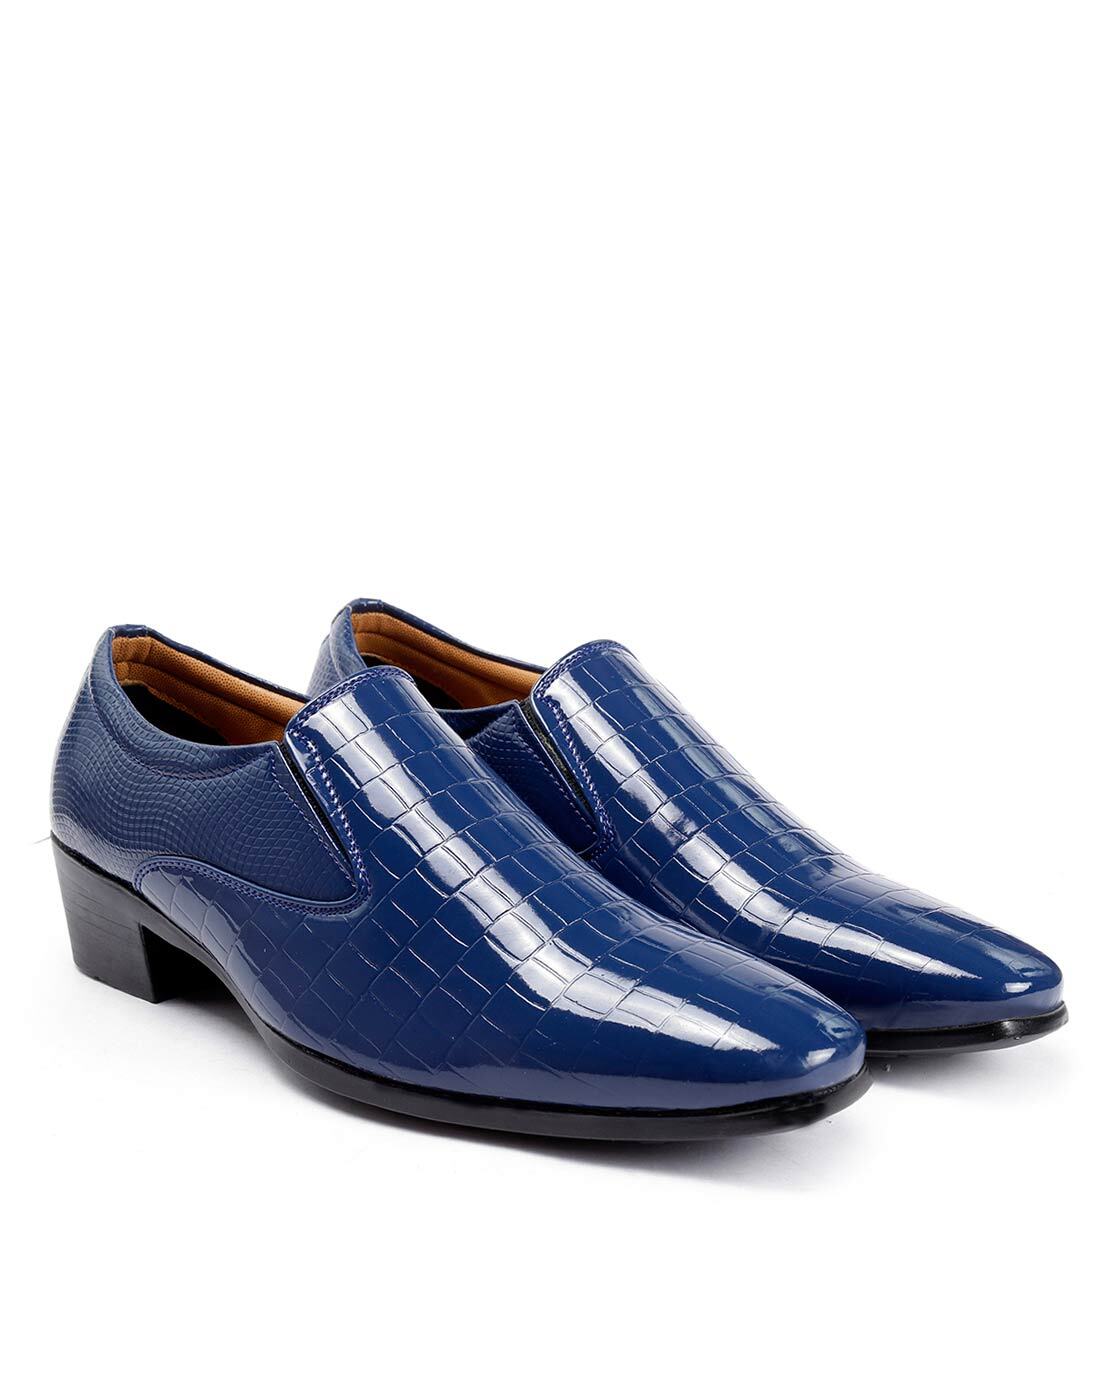 Buy Blue Formal Shoes for Men by GLOBAL RICH Online 